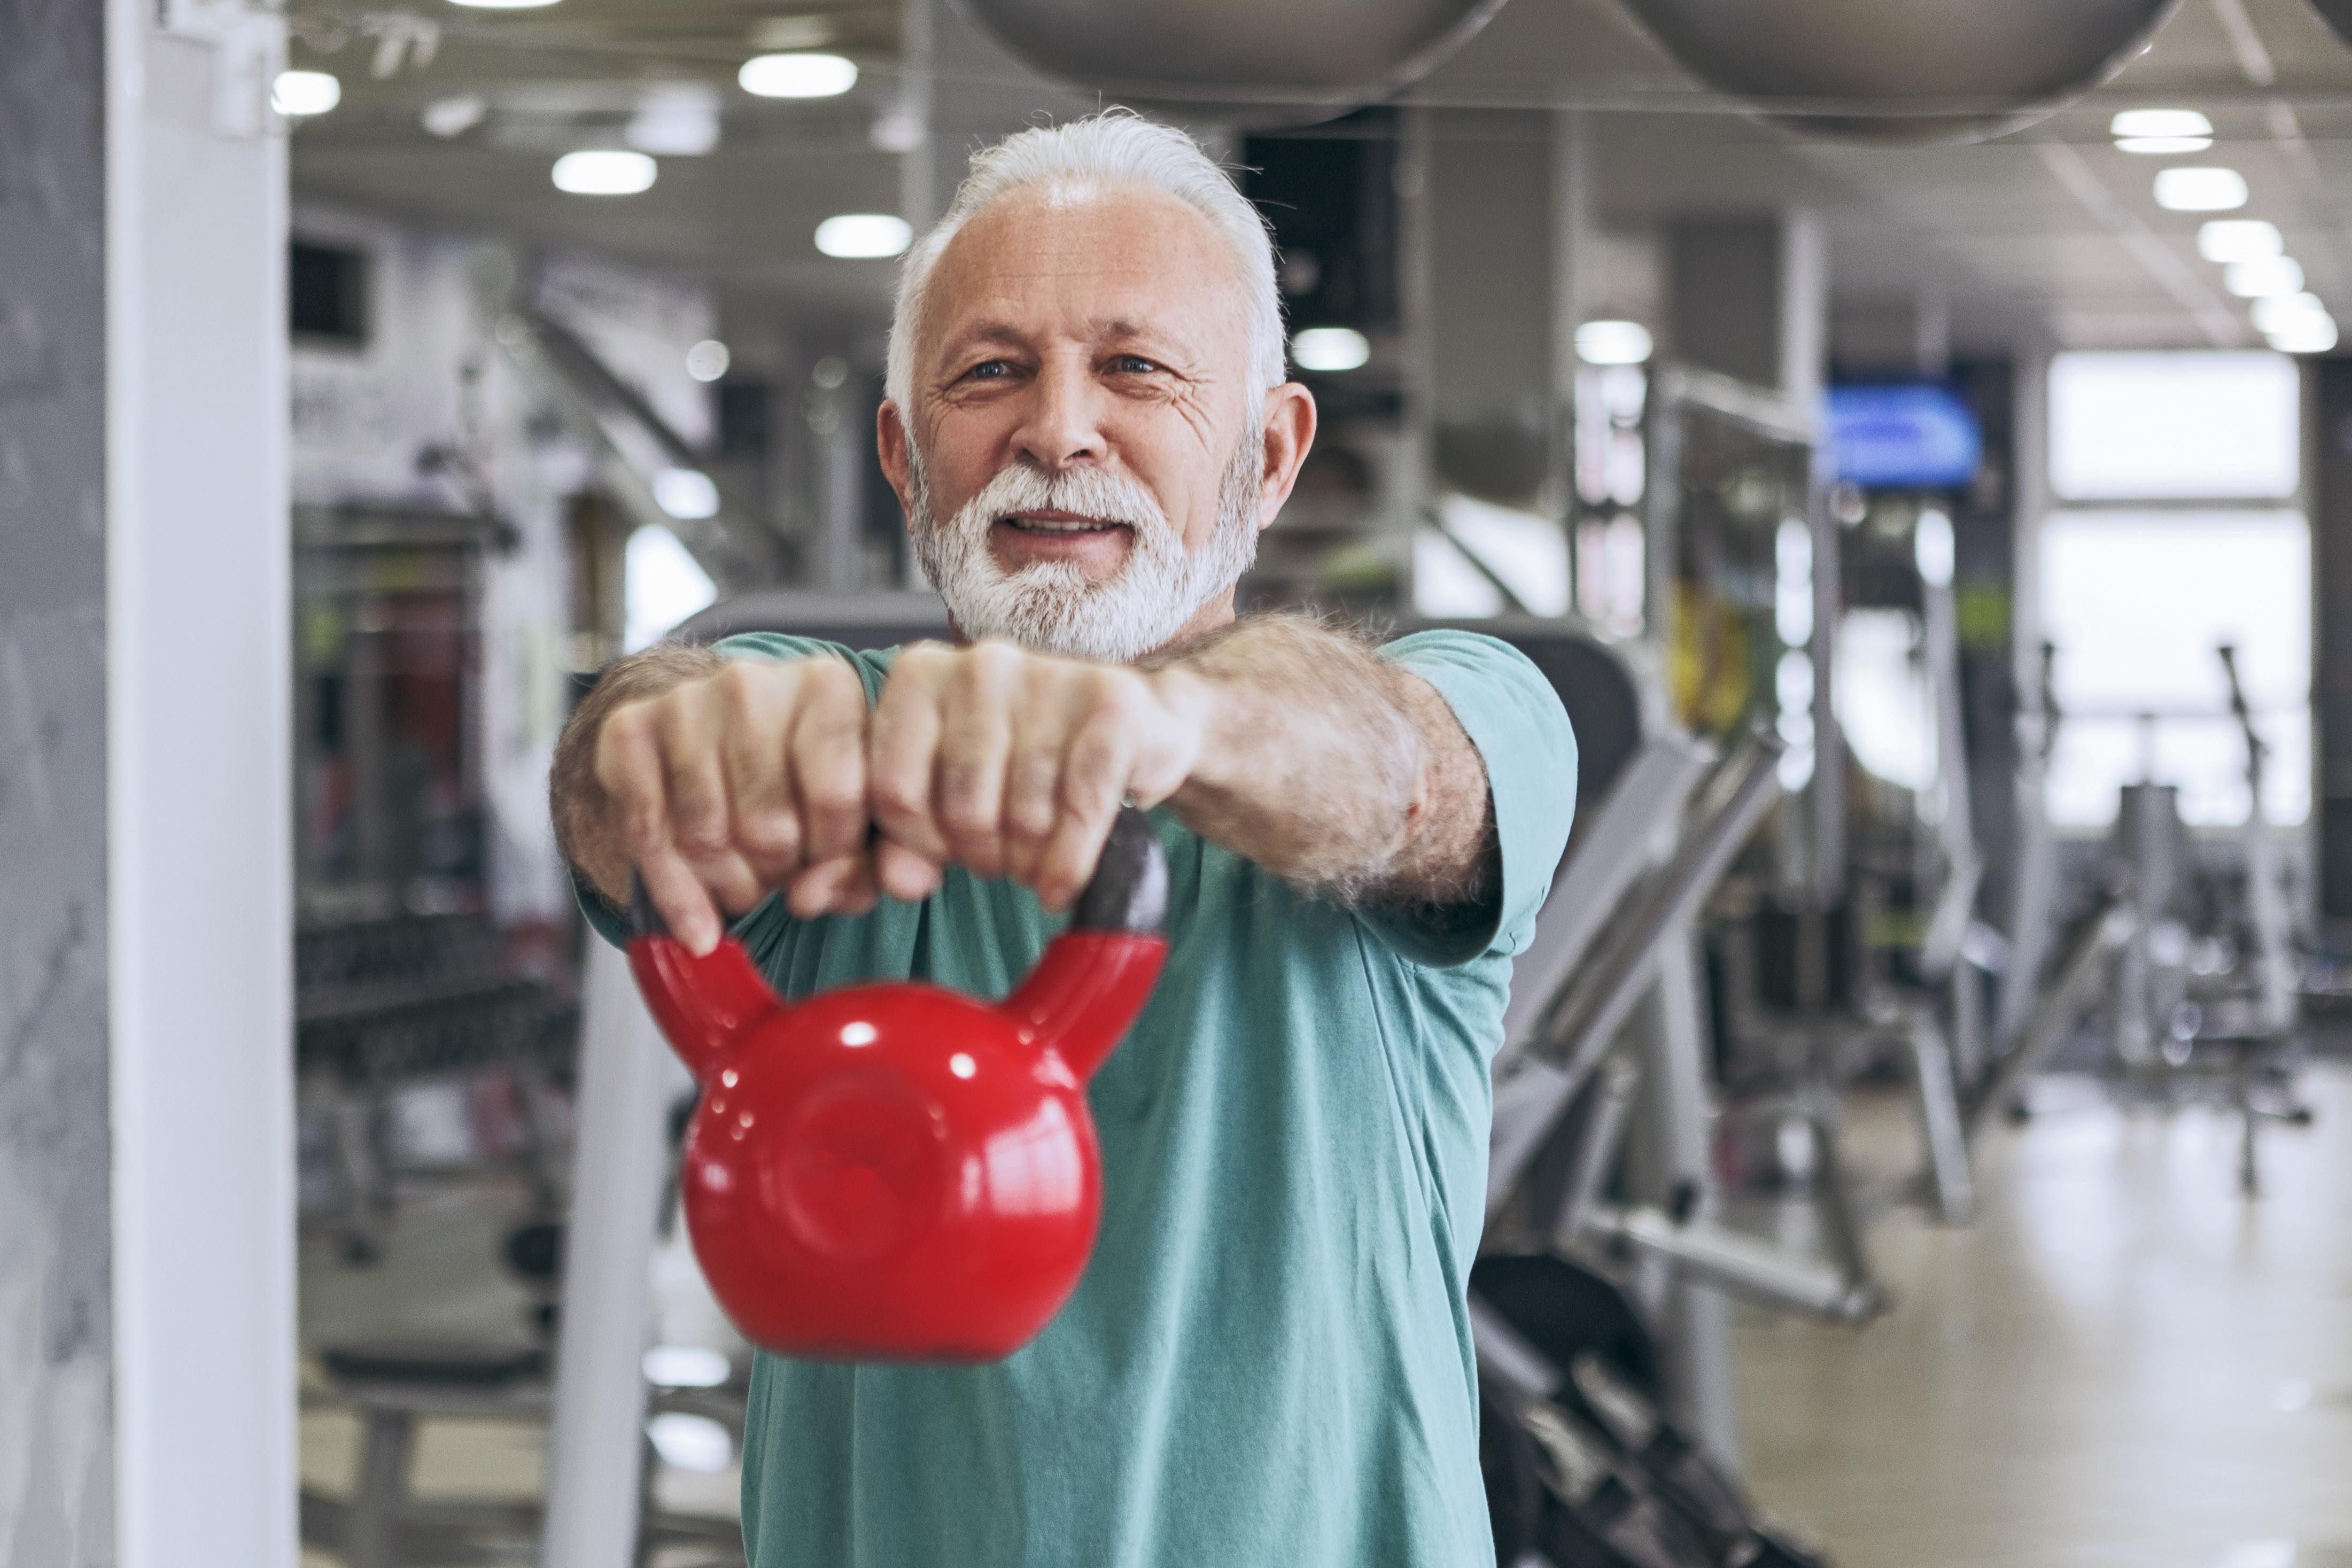 The Over 50 Training Plan: Best Exercises For Over 50s